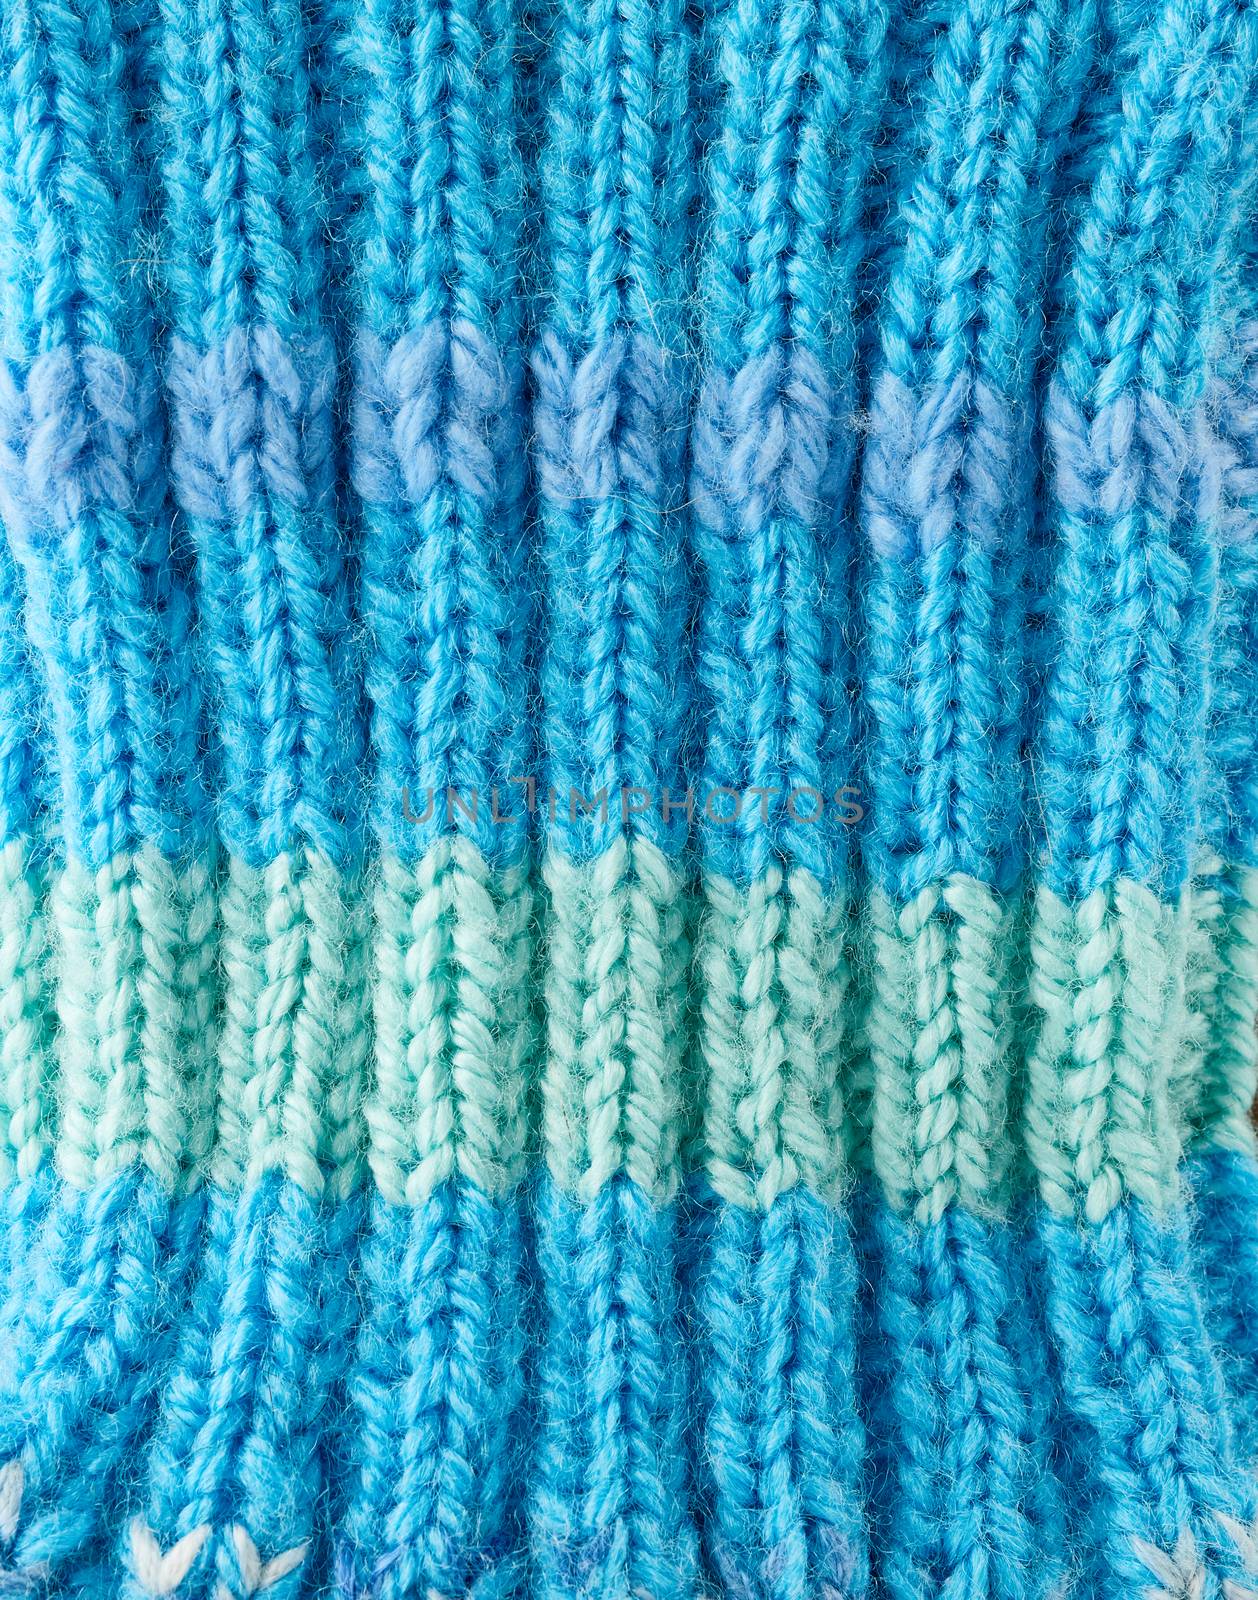 knitted blue texture, full frame, warm clothing by ndanko